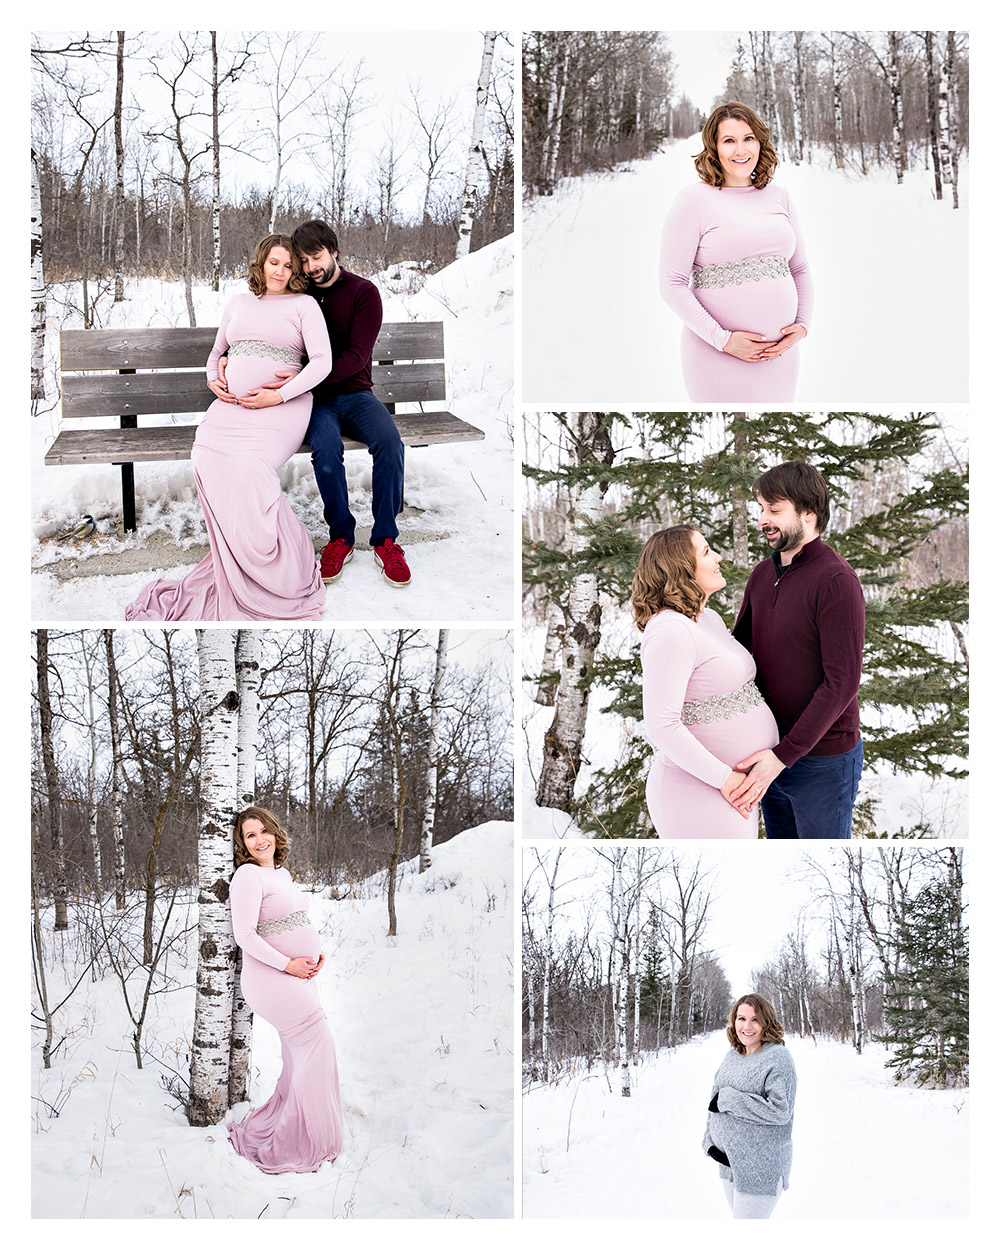 photos from a maternity session with Kristin Tiffany Photography